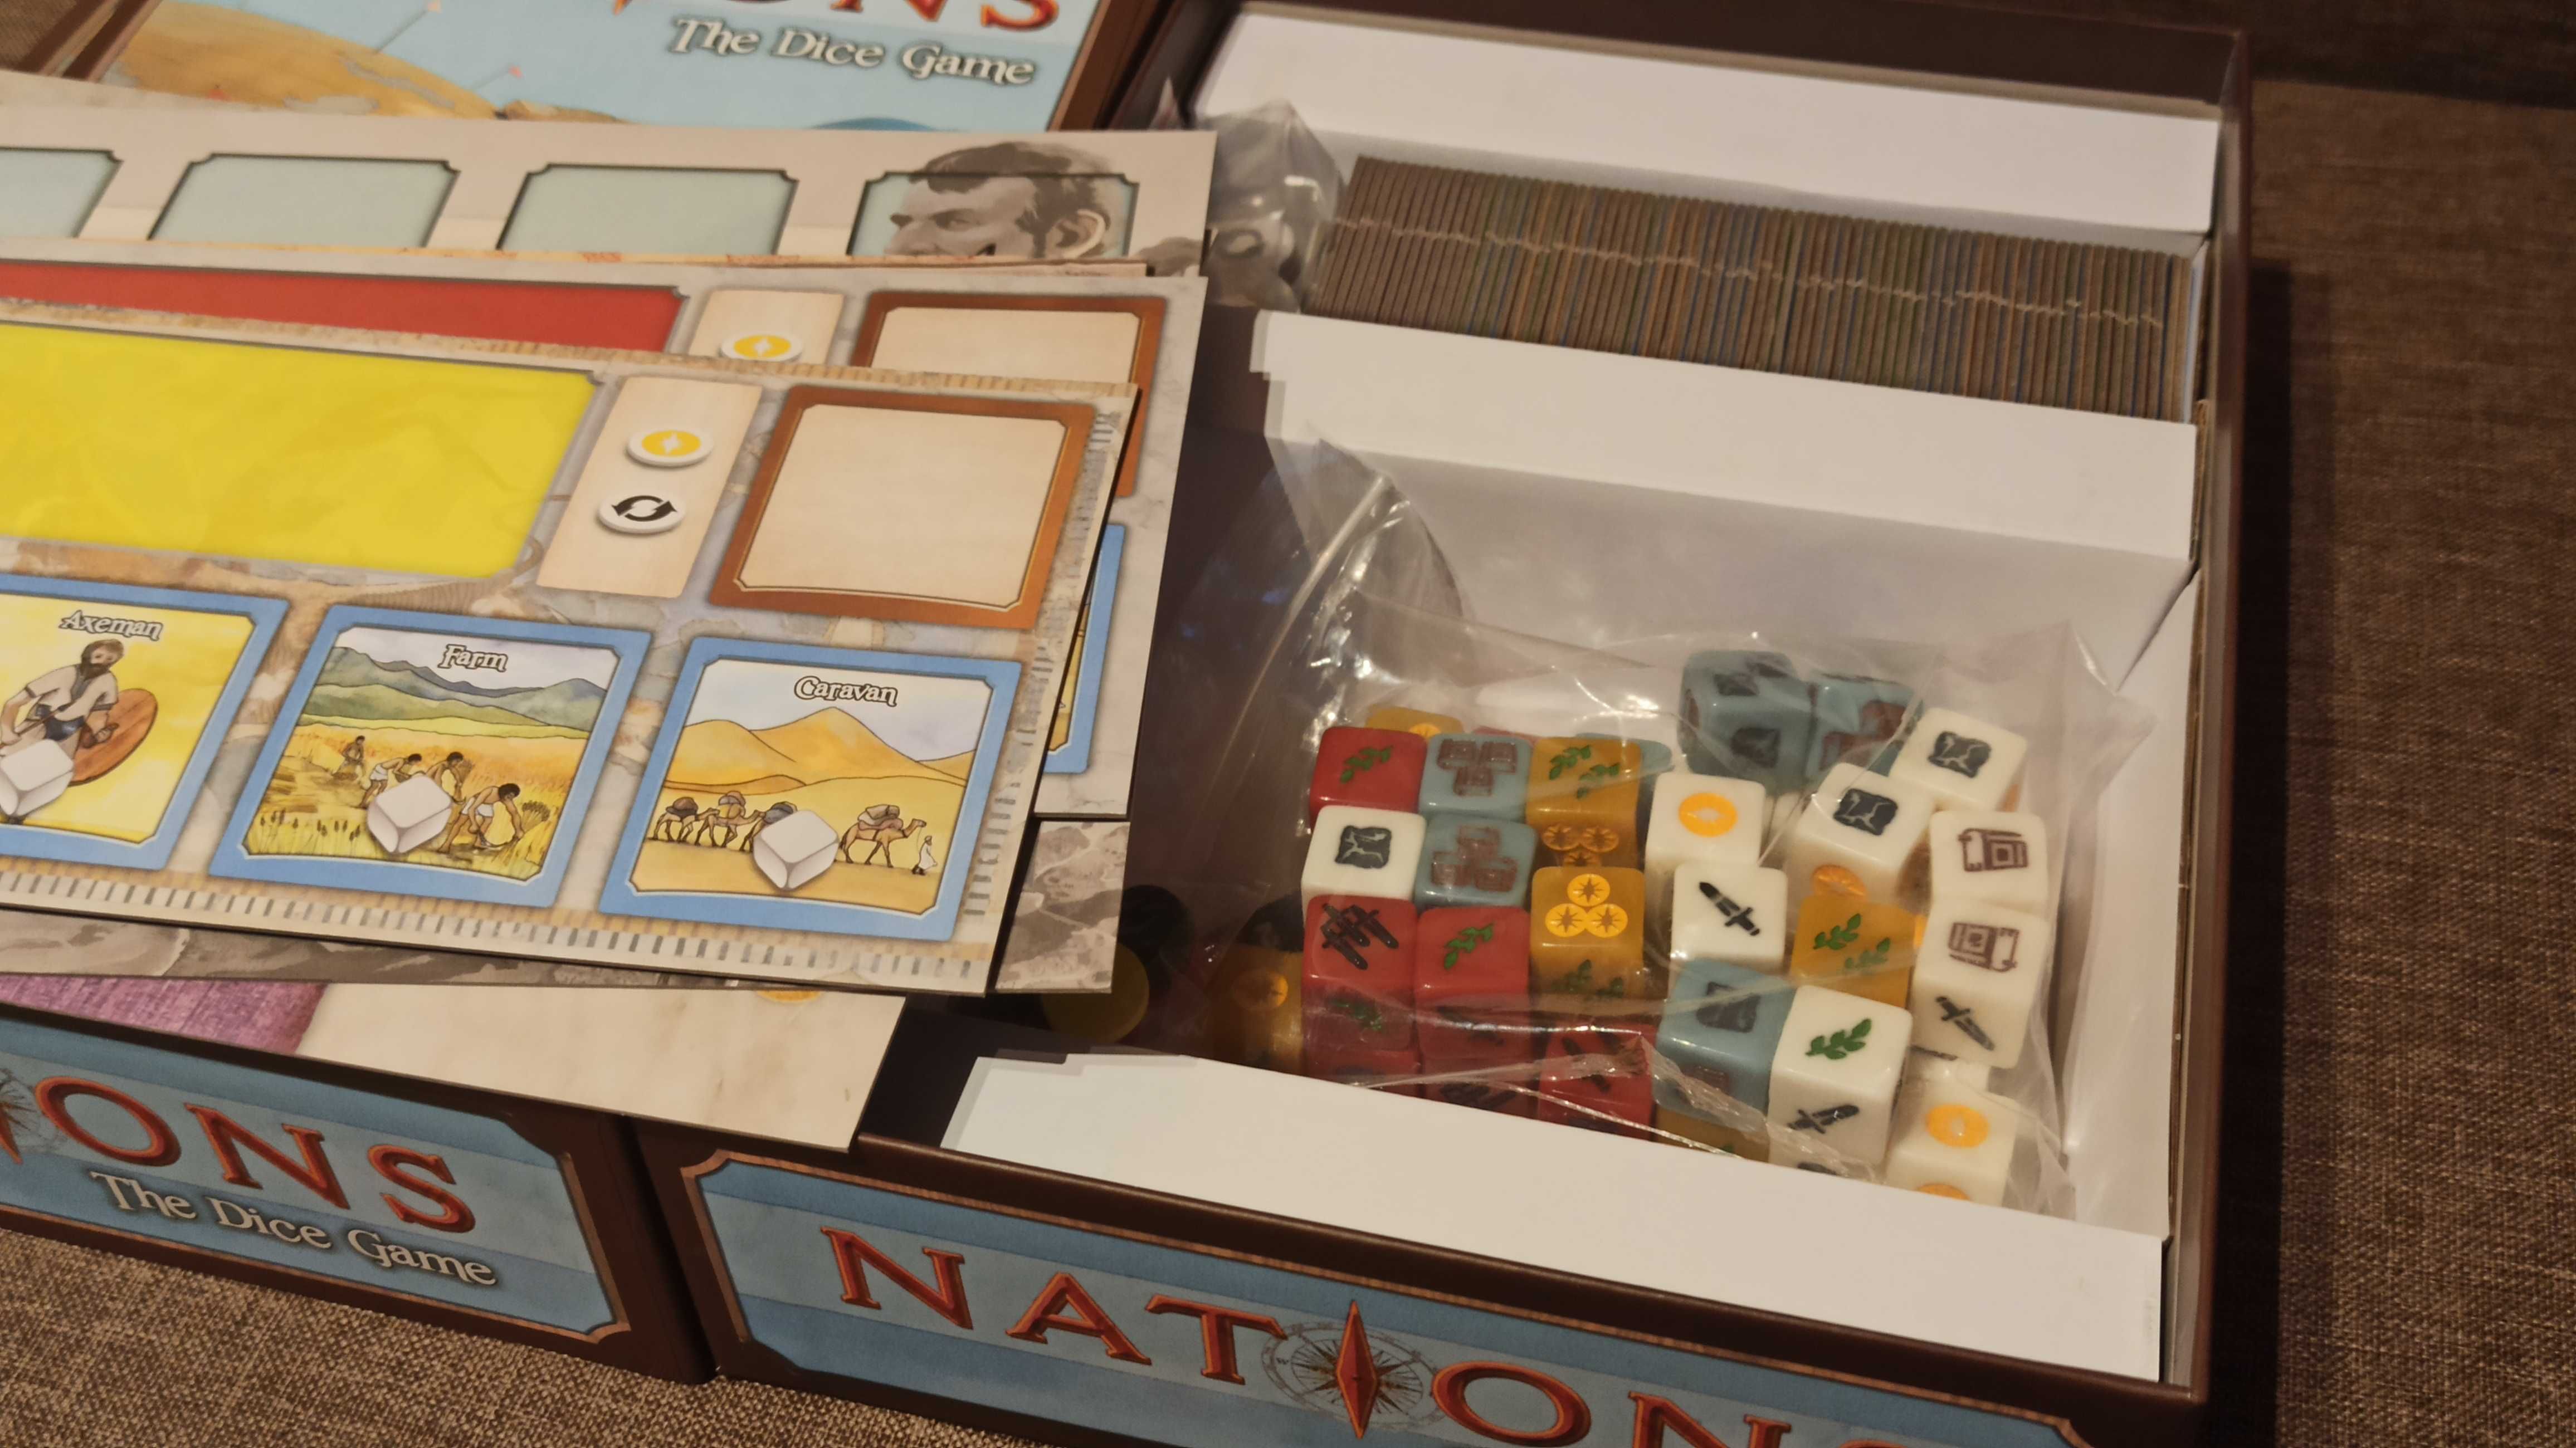 NATIONS The Dice Game, gra planszowa